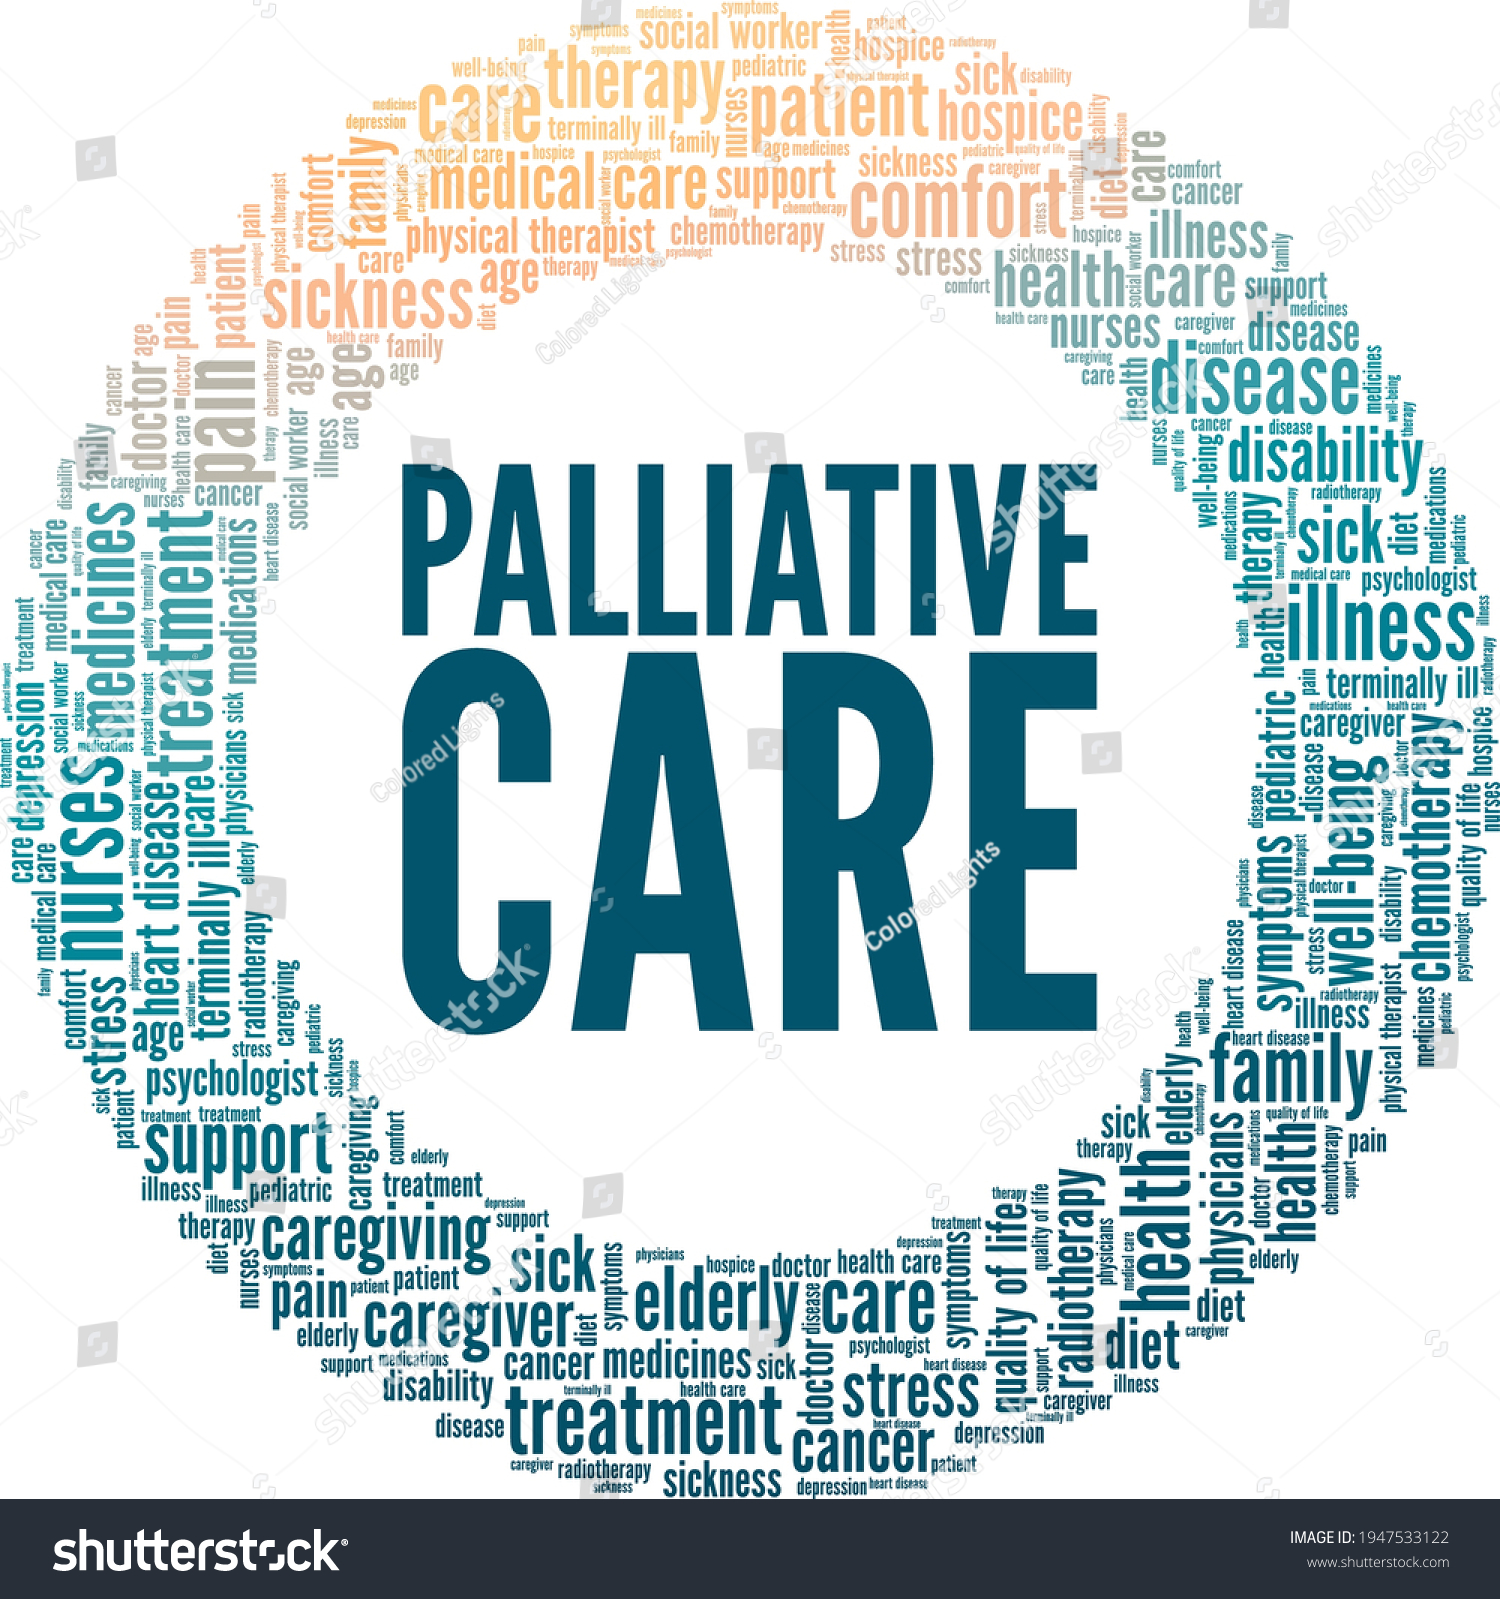 Palliative care vector illustration word cloud isolated on a white background. #1947533122